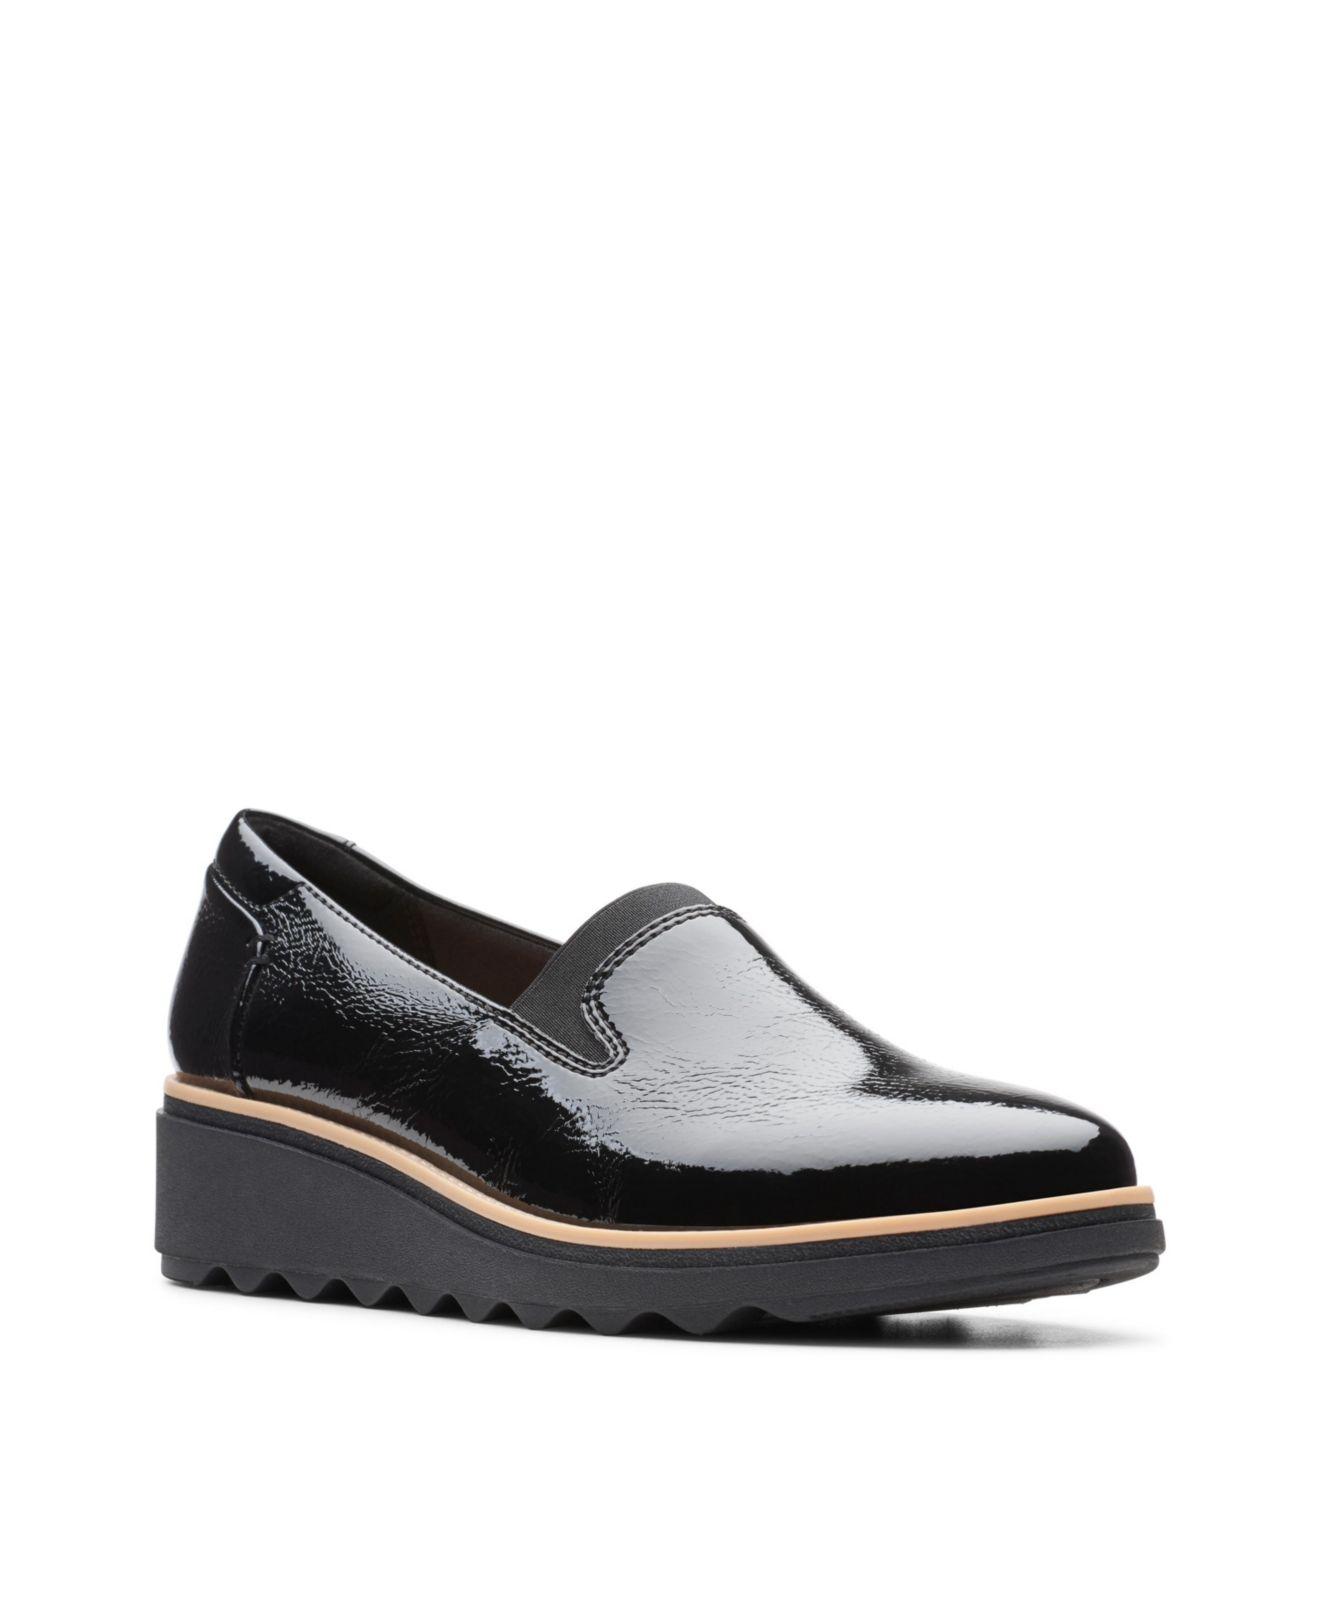 Clarks Suede Sharon Dolly Platform Loafers in Black Patent (Black) - Lyst